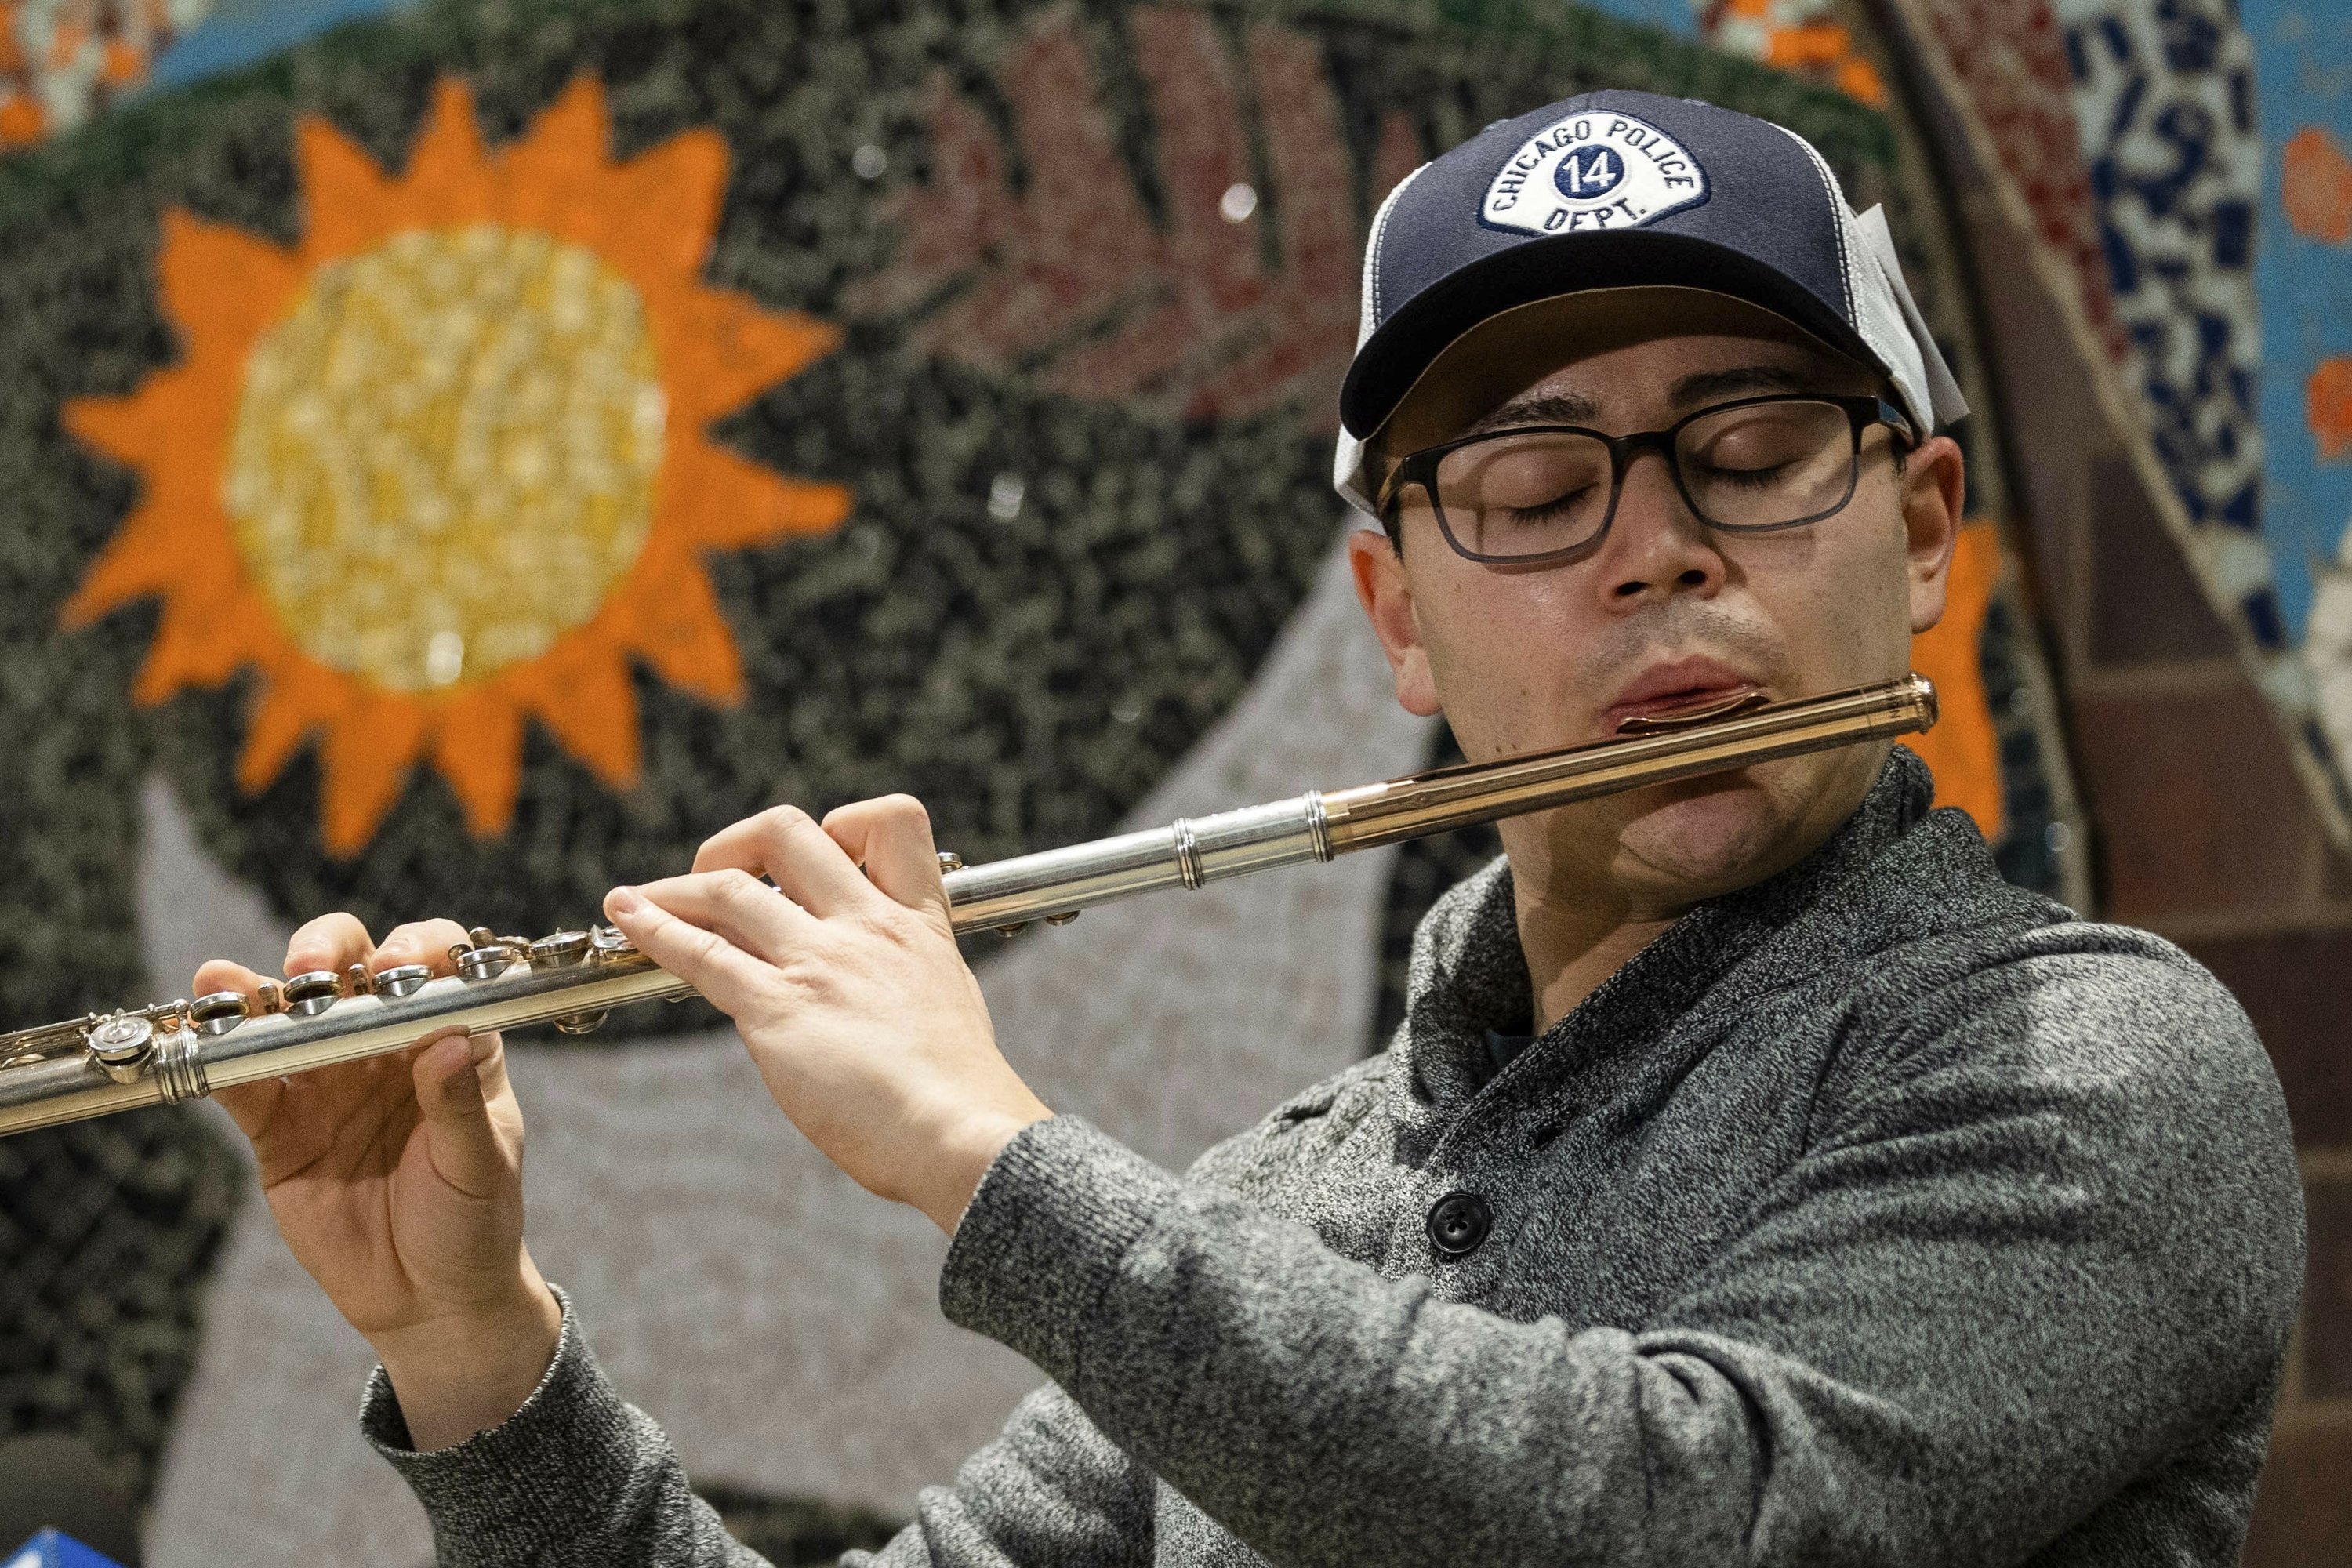 The $ 22,000 flute lost on the Chicago train appears in the pawnshop